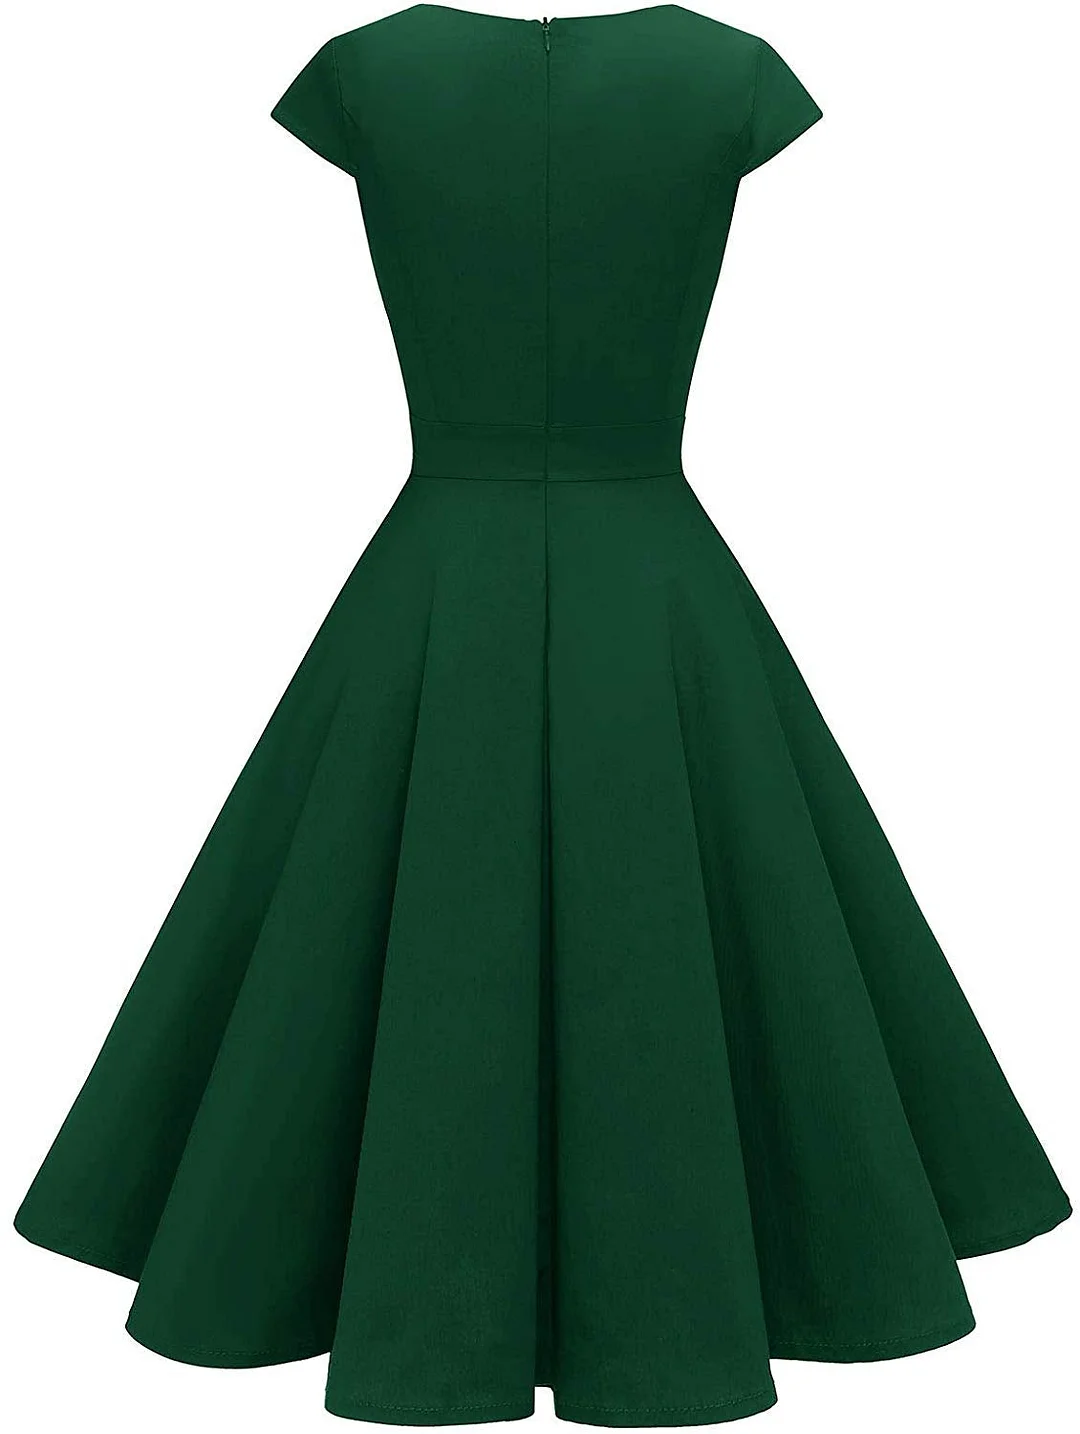 1950s Retro Vintage A-Line Cap Sleeve Cocktail Swing Party Dress for women